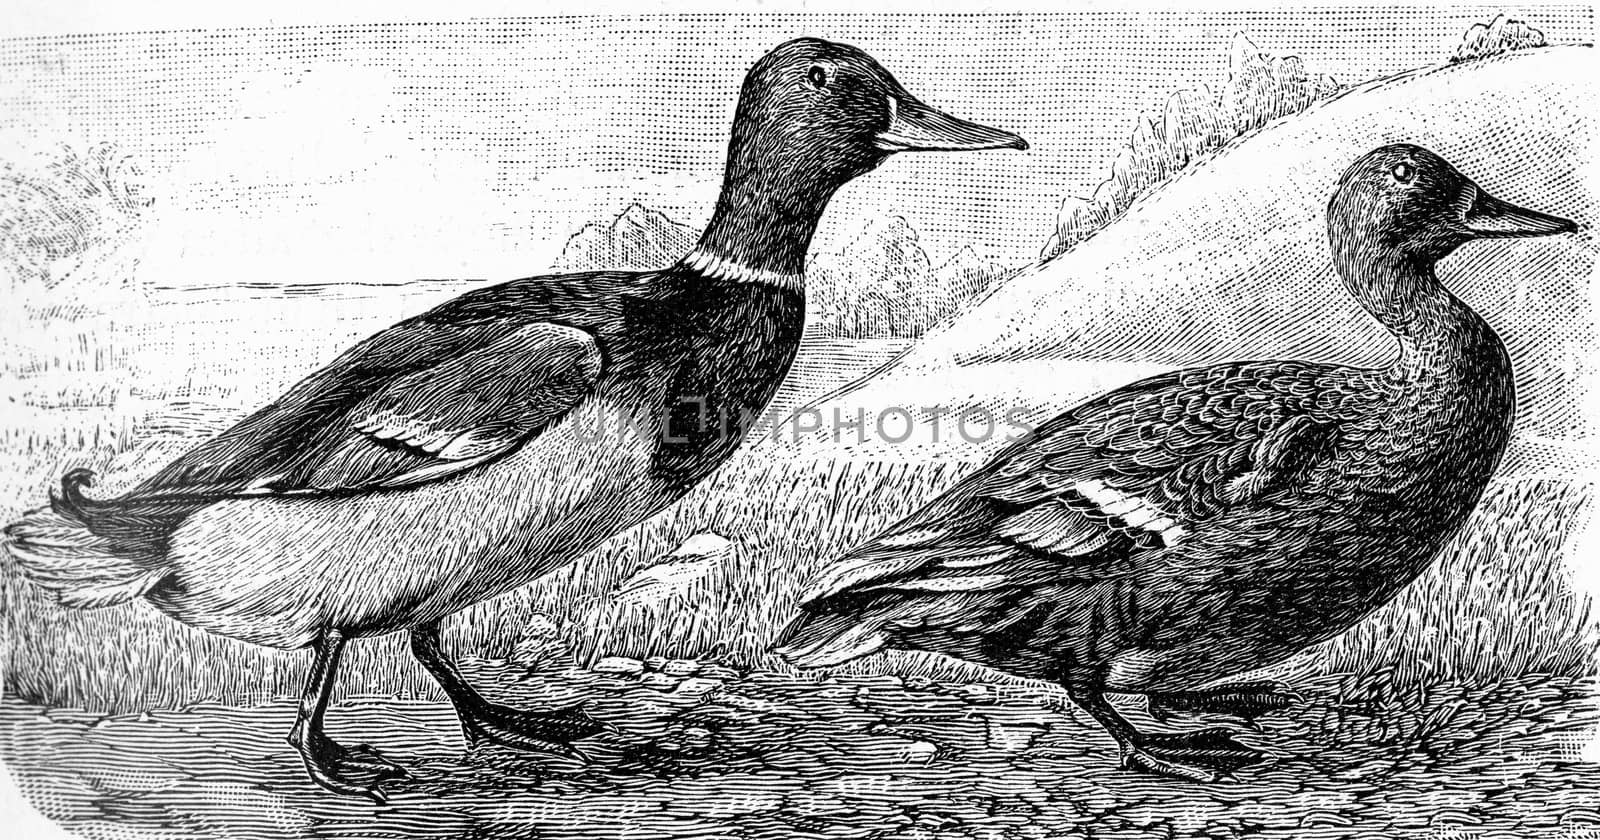 The wild duck, vintage engraved illustration. From Deutch Vogel Teaching in Zoology.
